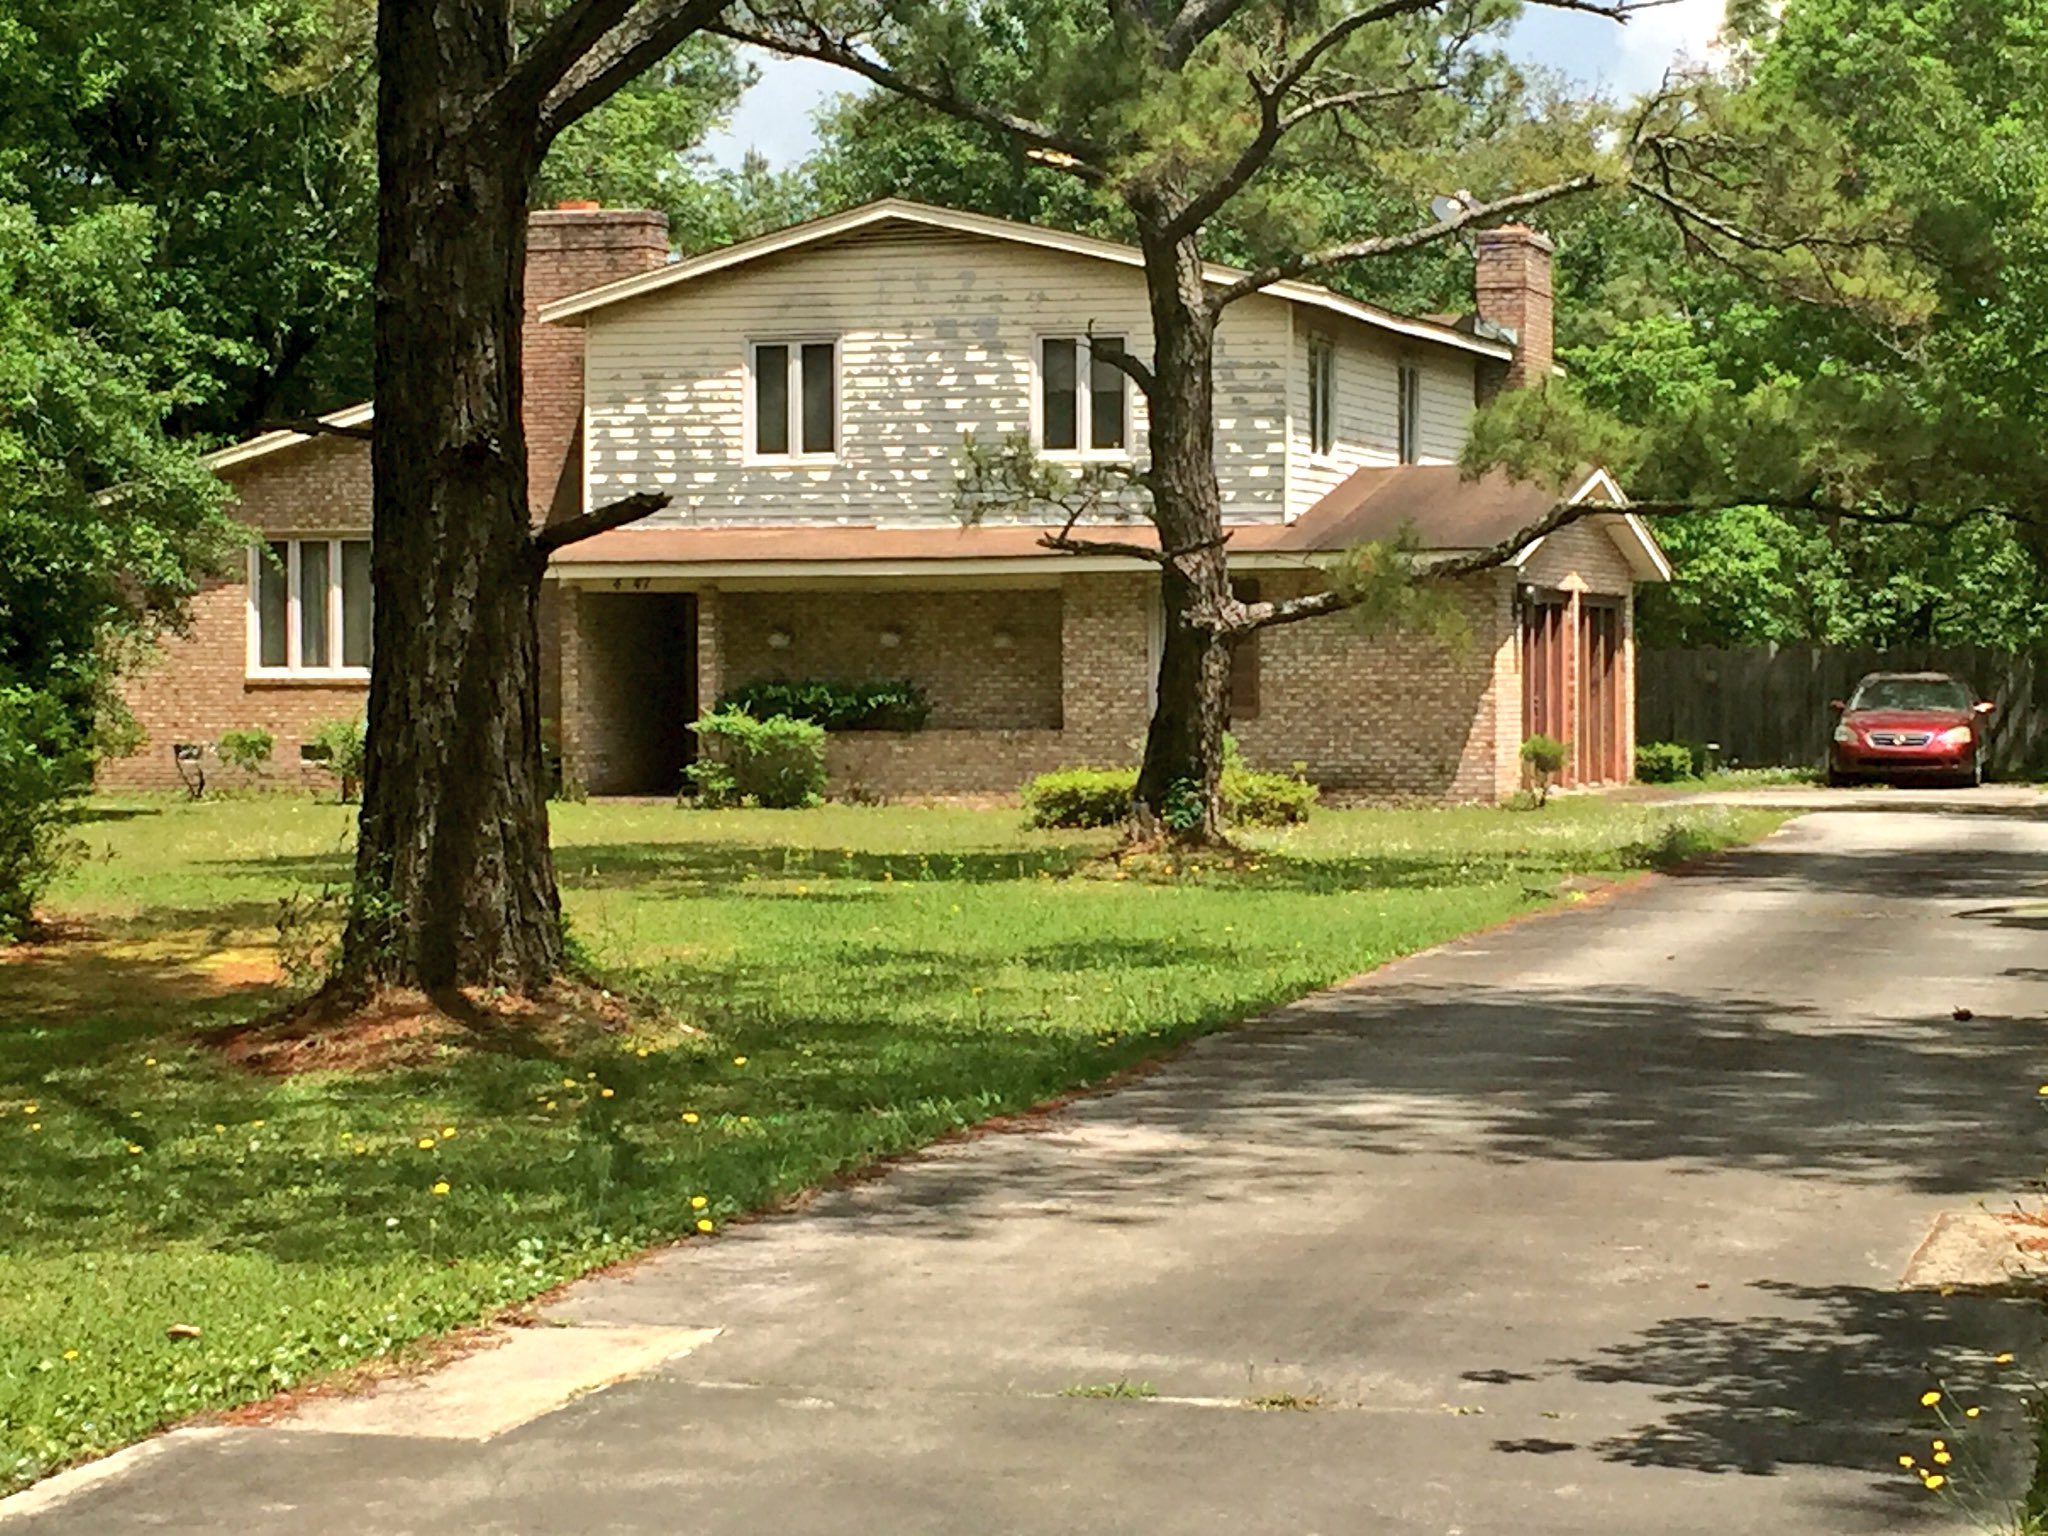 Chicago History ™️ no Twitter: "This was the childhood home of Michael Jordan. located in Wilmington, Carolina. / Twitter